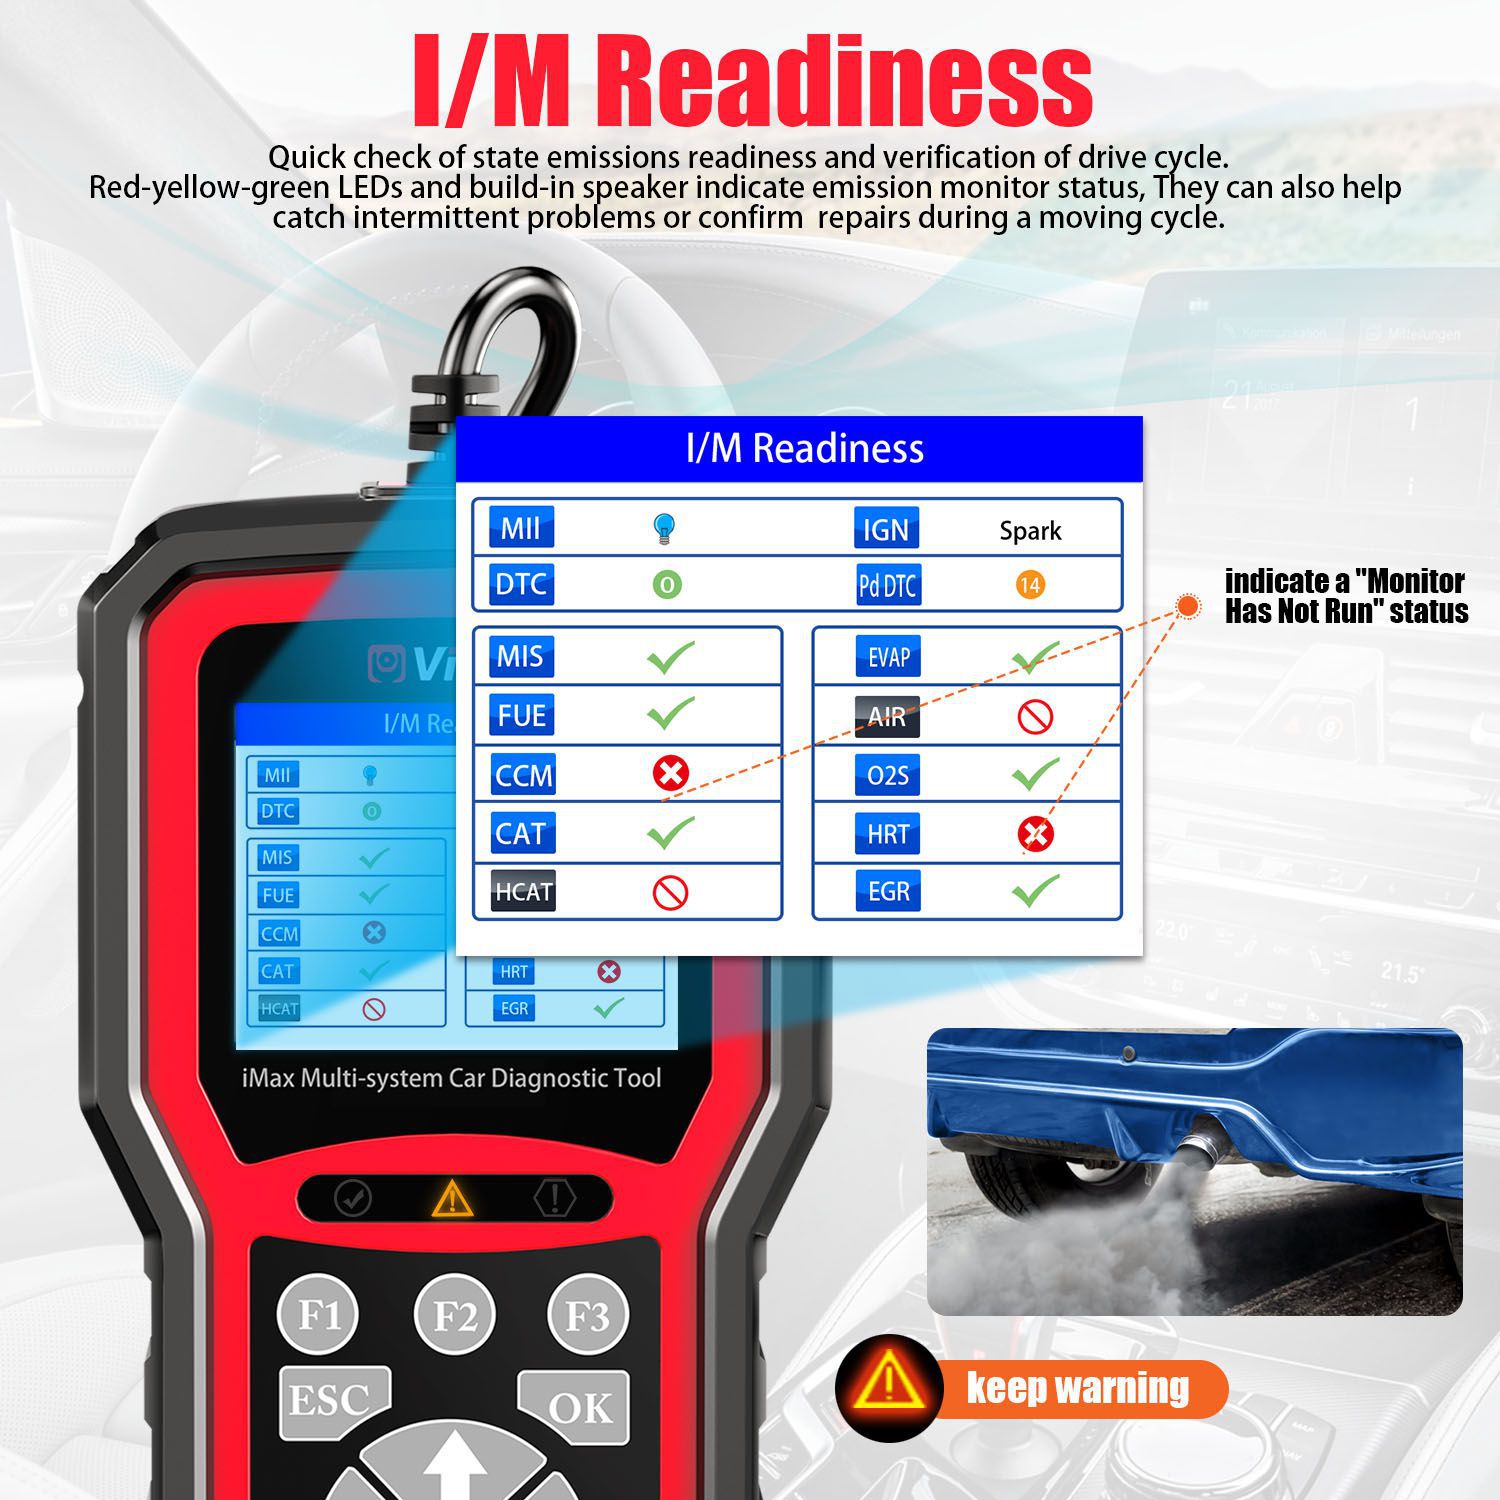 Vident imax4304 GM Automotive Diagnostic tool for Chevrolet, Buick, Cadillac, ozmobil, Pontiac and GMC